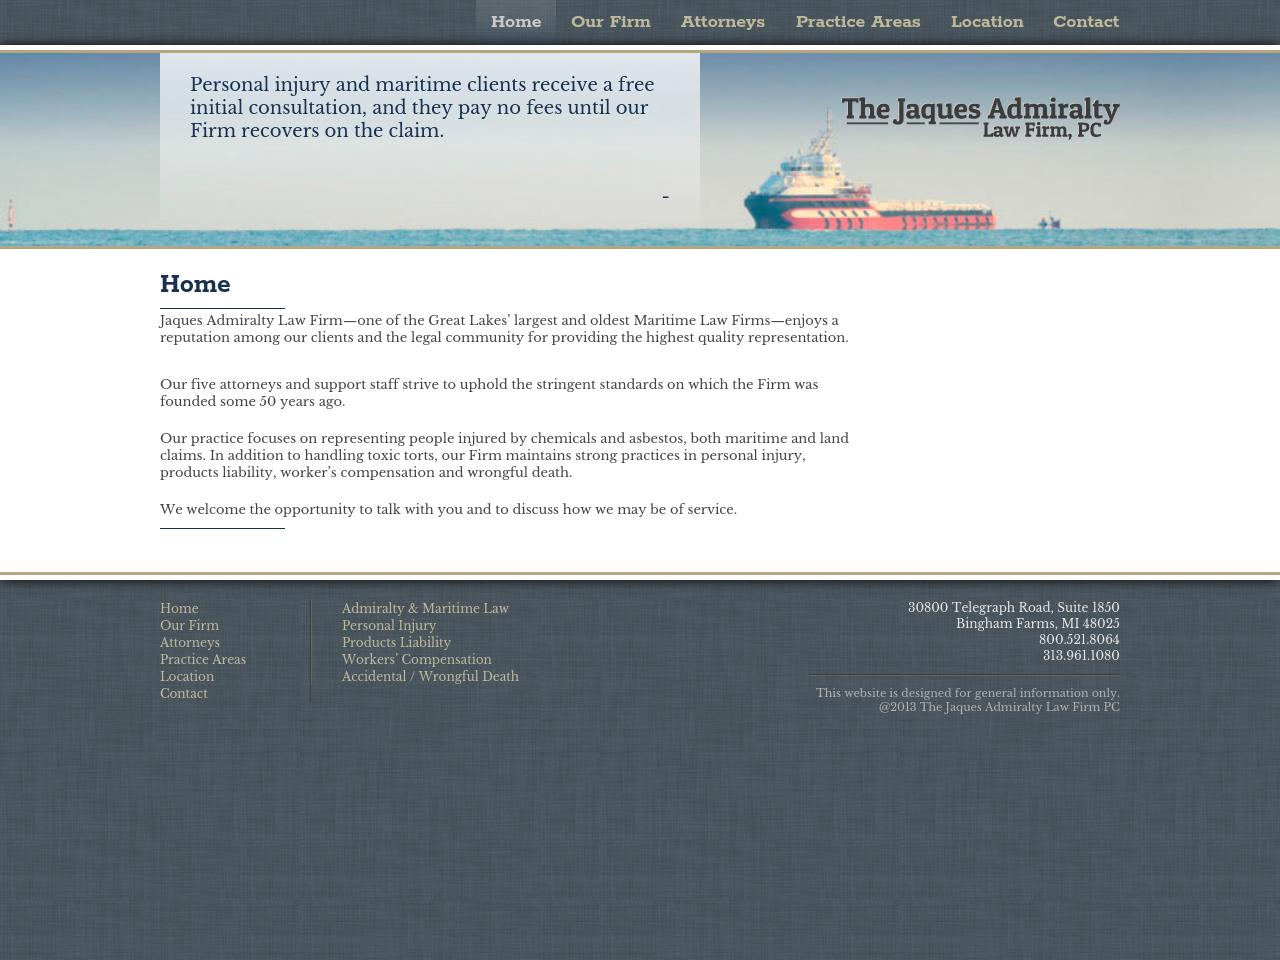 The Jaques Admiralty Law Firm, P.C. - Detroit MI Lawyers